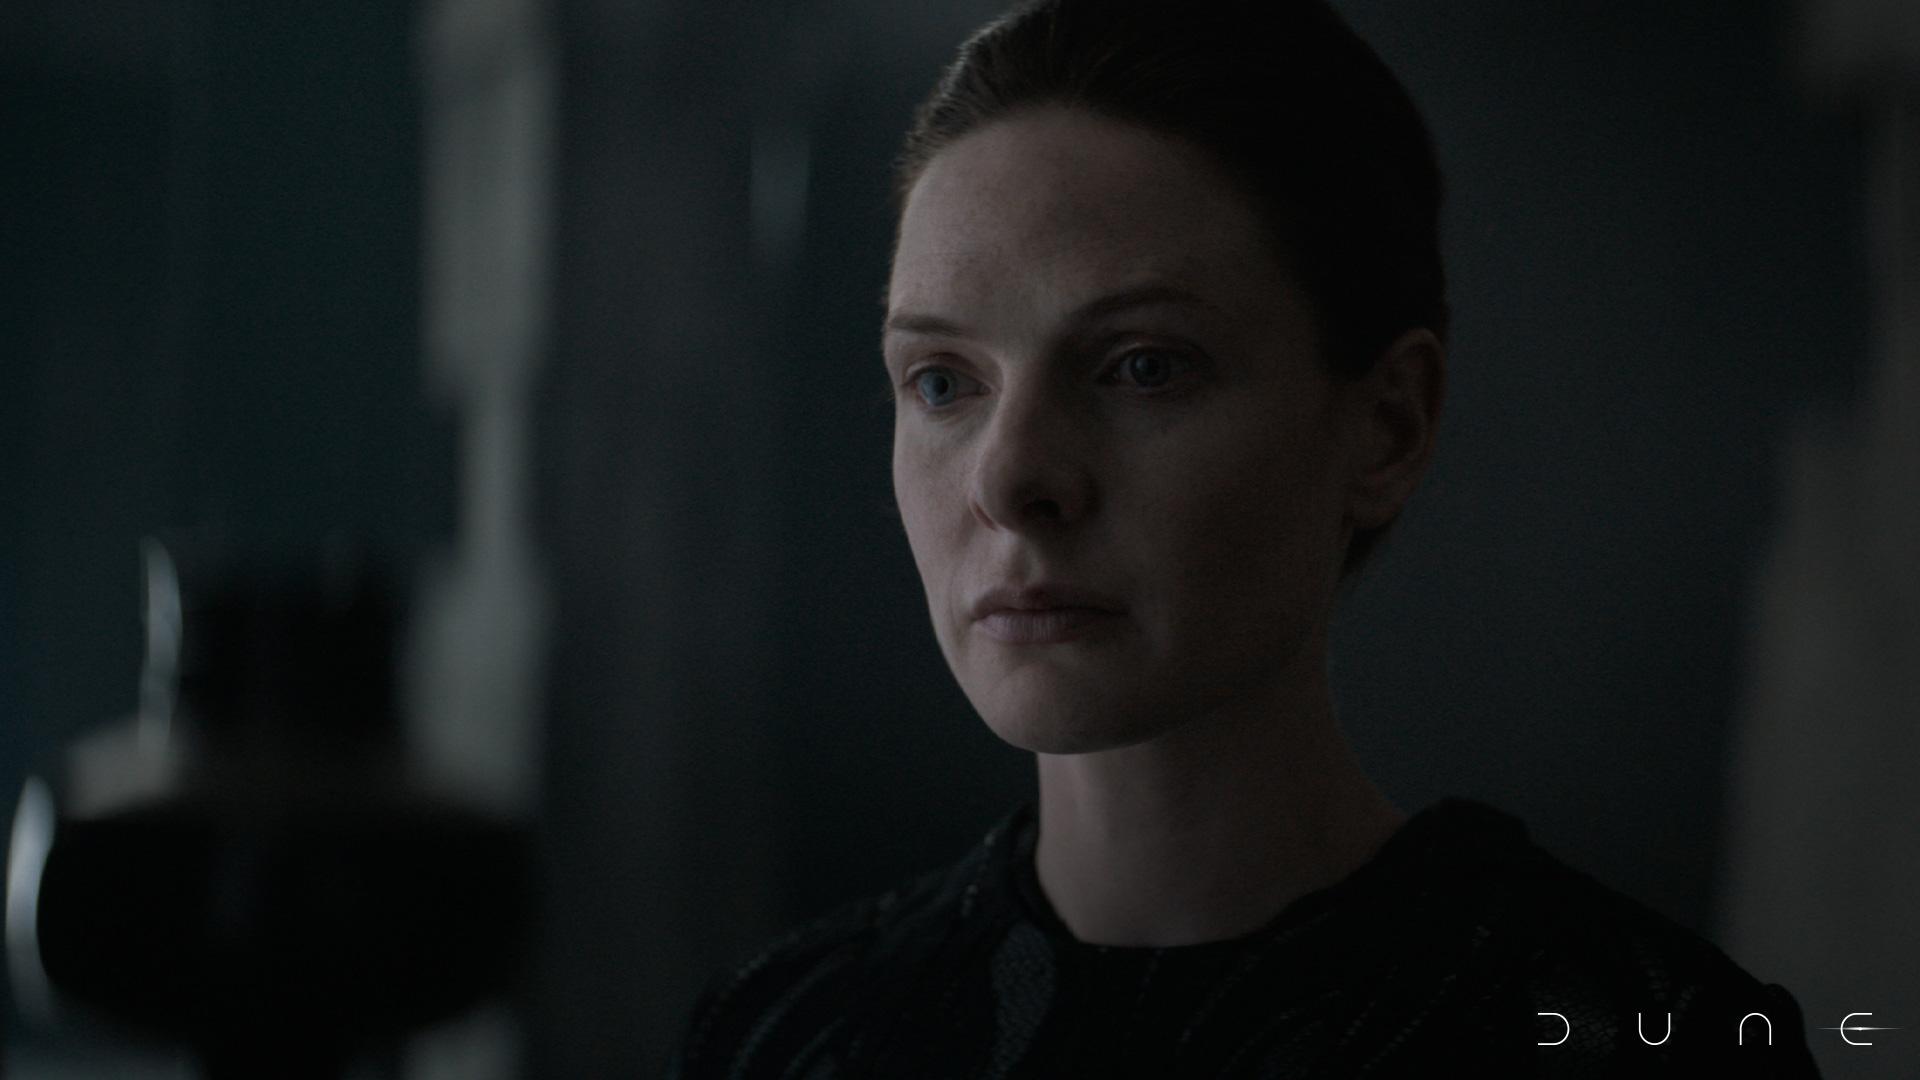 Rebecca Ferguson as Lady Jessica in Dune. She is in a dark room, with half of her face covered by shadow.